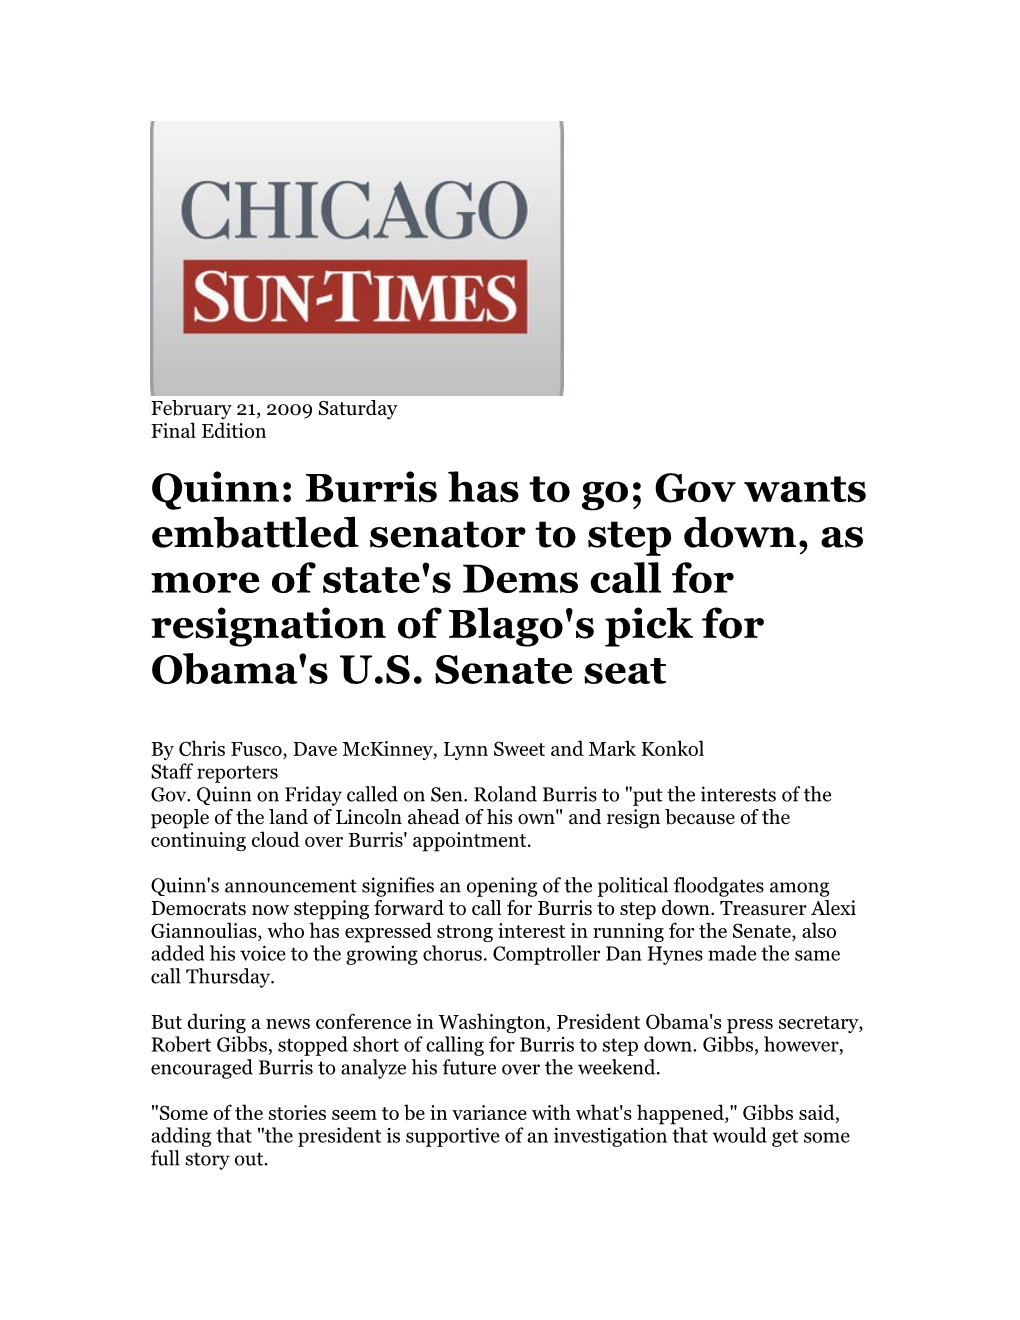 Quinn: Burris Has to Go; Gov Wants Embattled Senator to Step Down, As More of State's